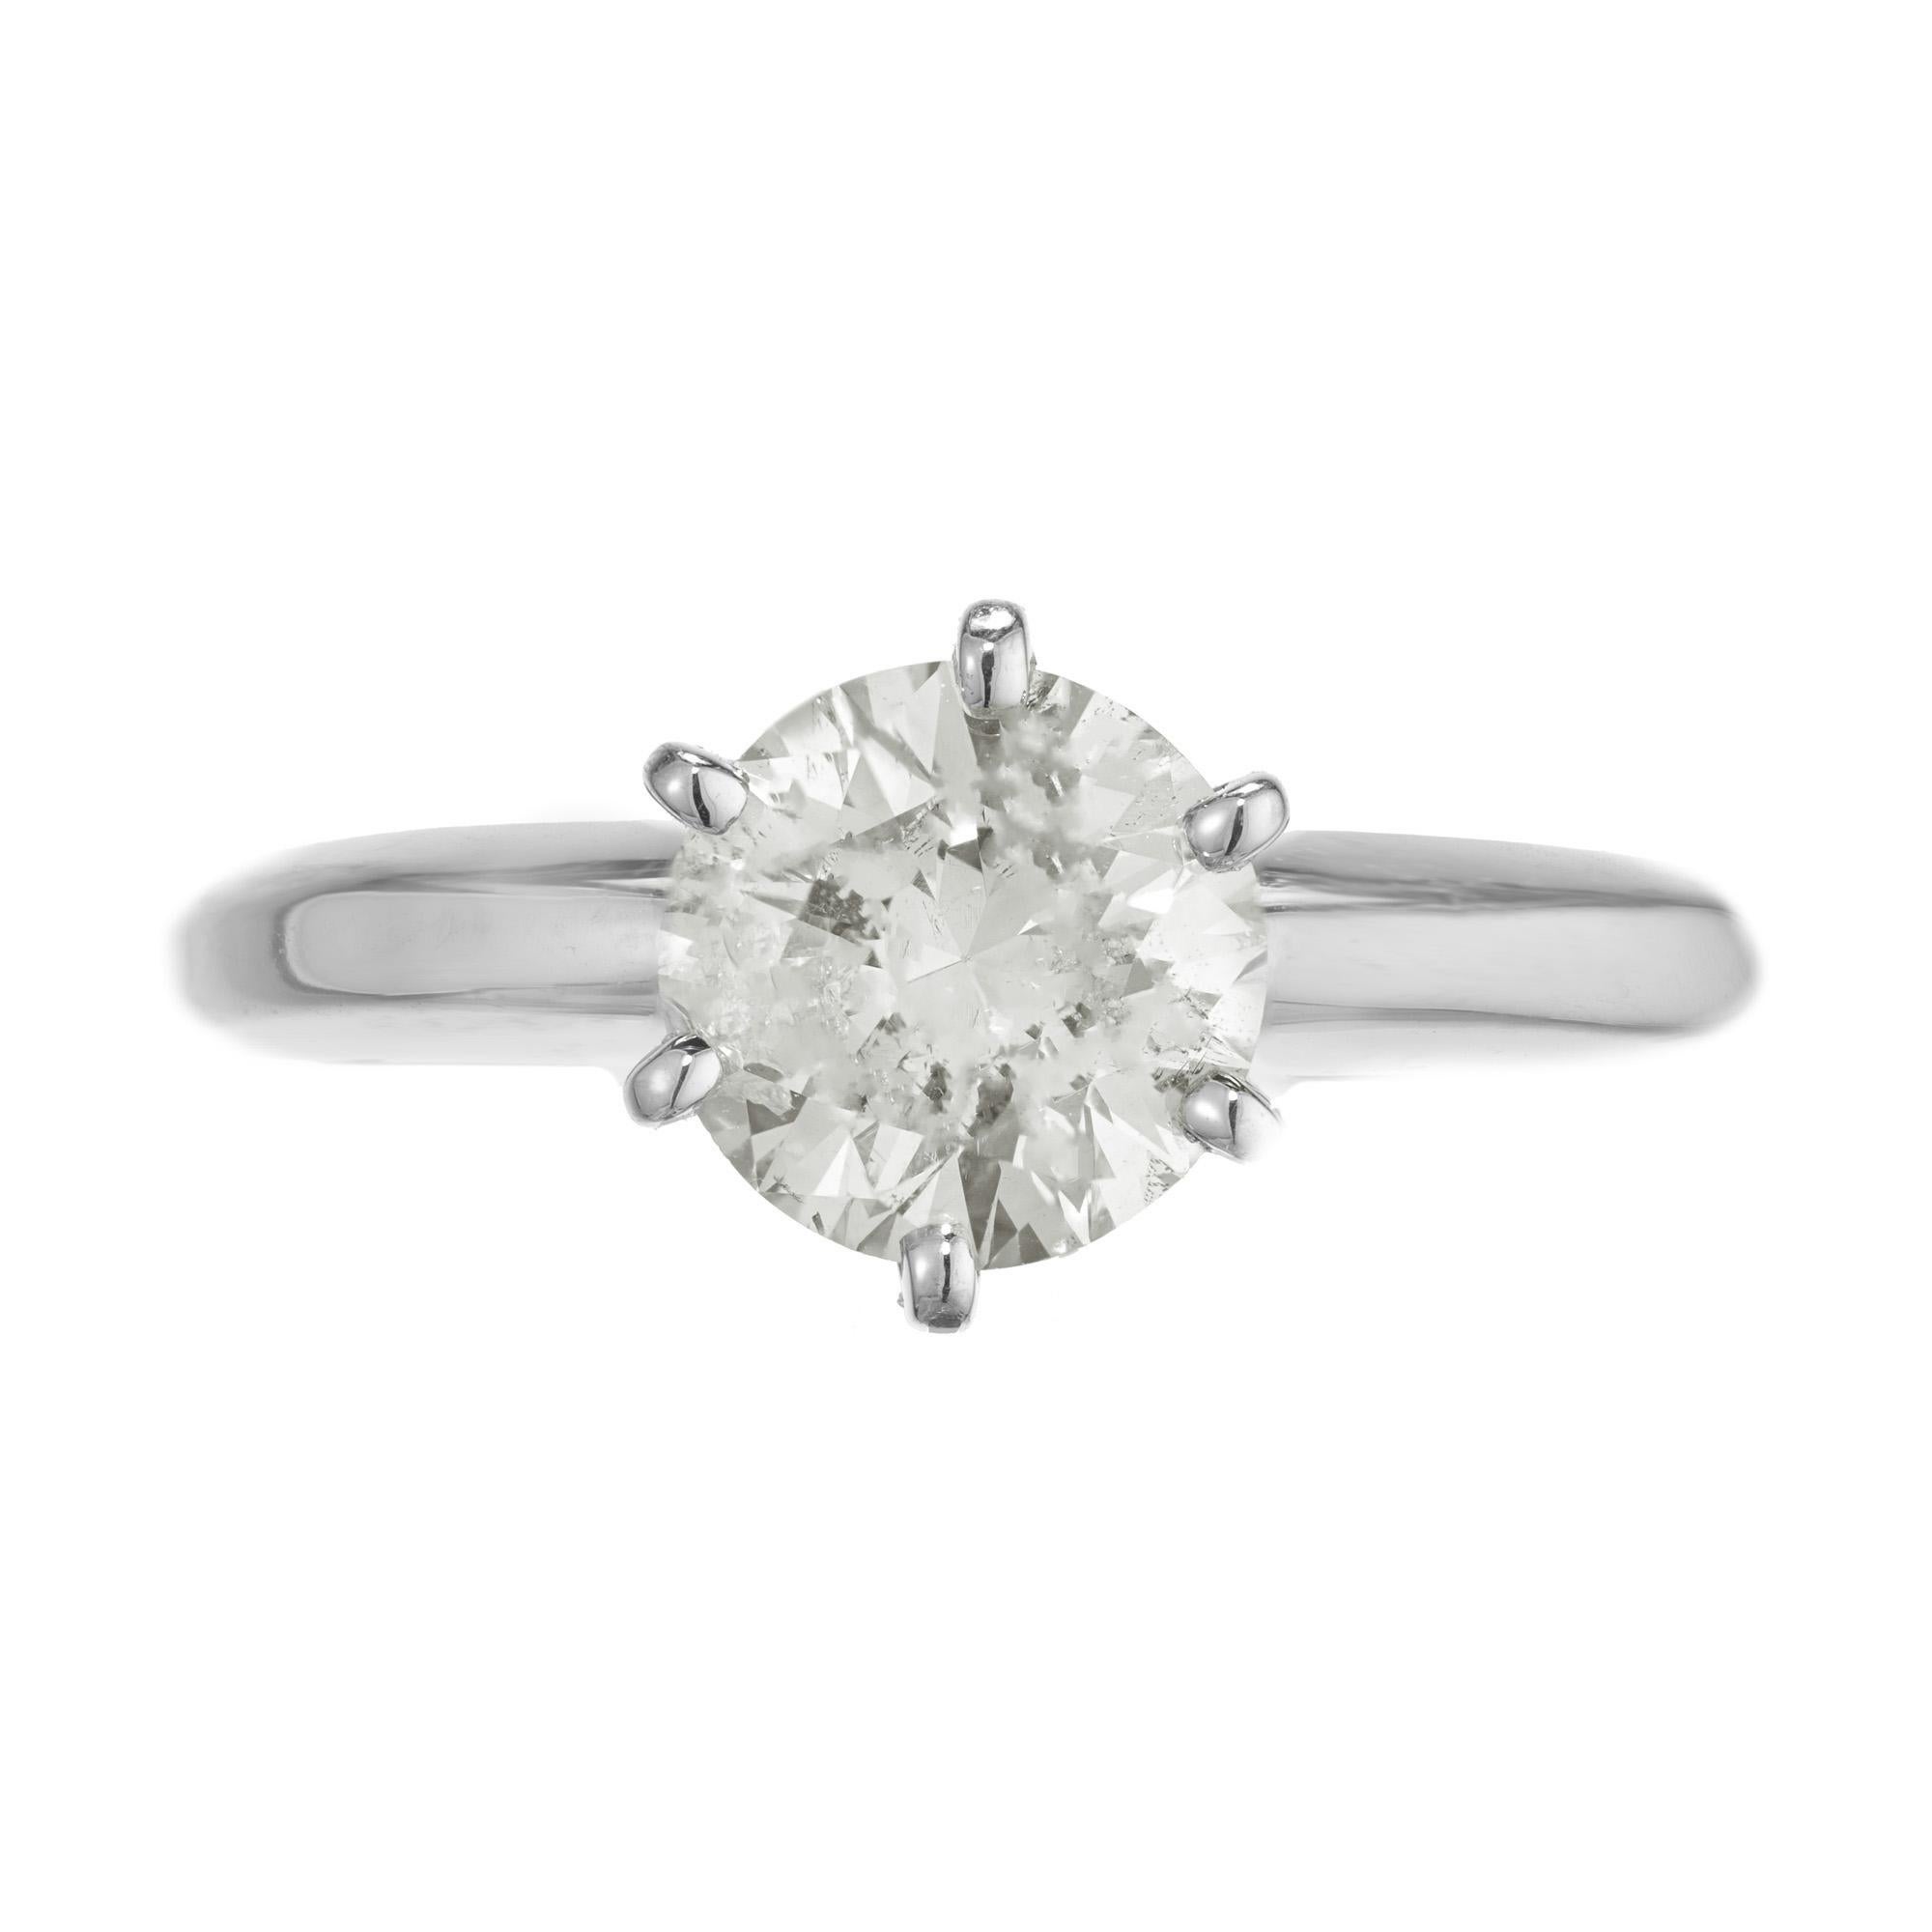 EGL certified diamond engagement ring. 1.10ct round cut diamond center in stone. Set in a Platinum solitaire six prong setting. This diamond has faint yellow coloring that is more expressive at certain angles that is hard to photograph. 

1 round